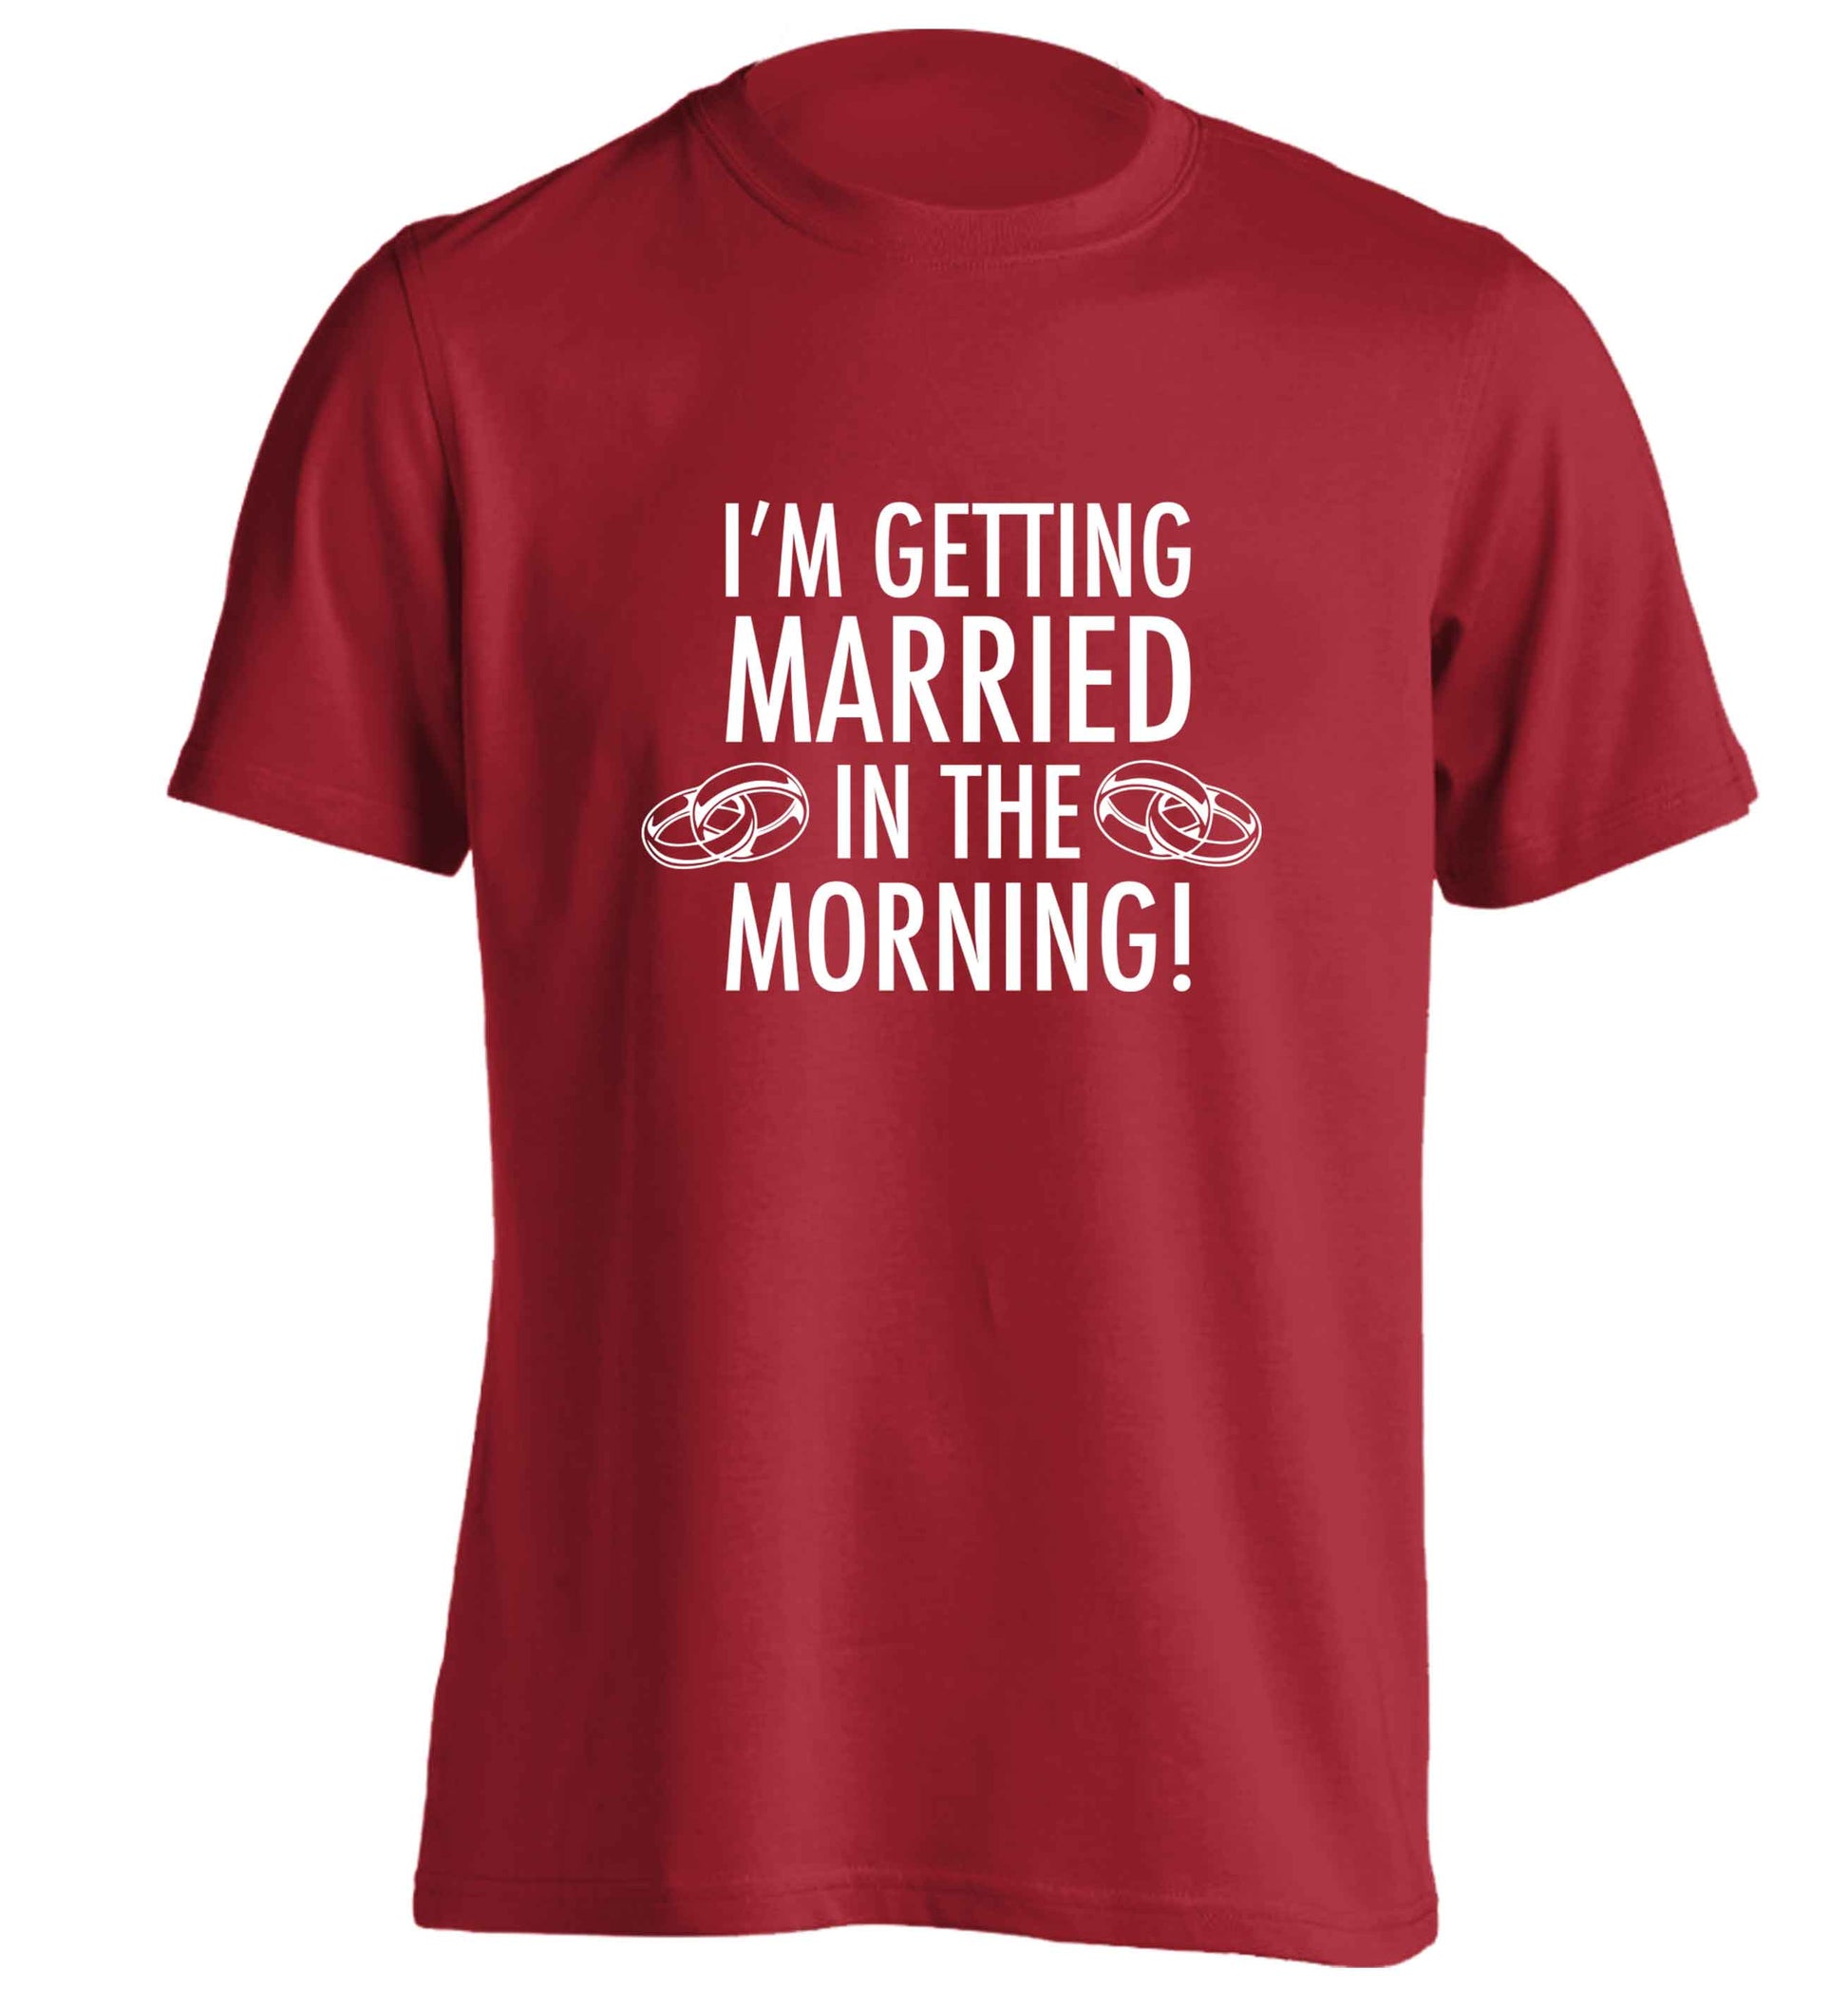 I'm getting married in the morning! adults unisex red Tshirt 2XL